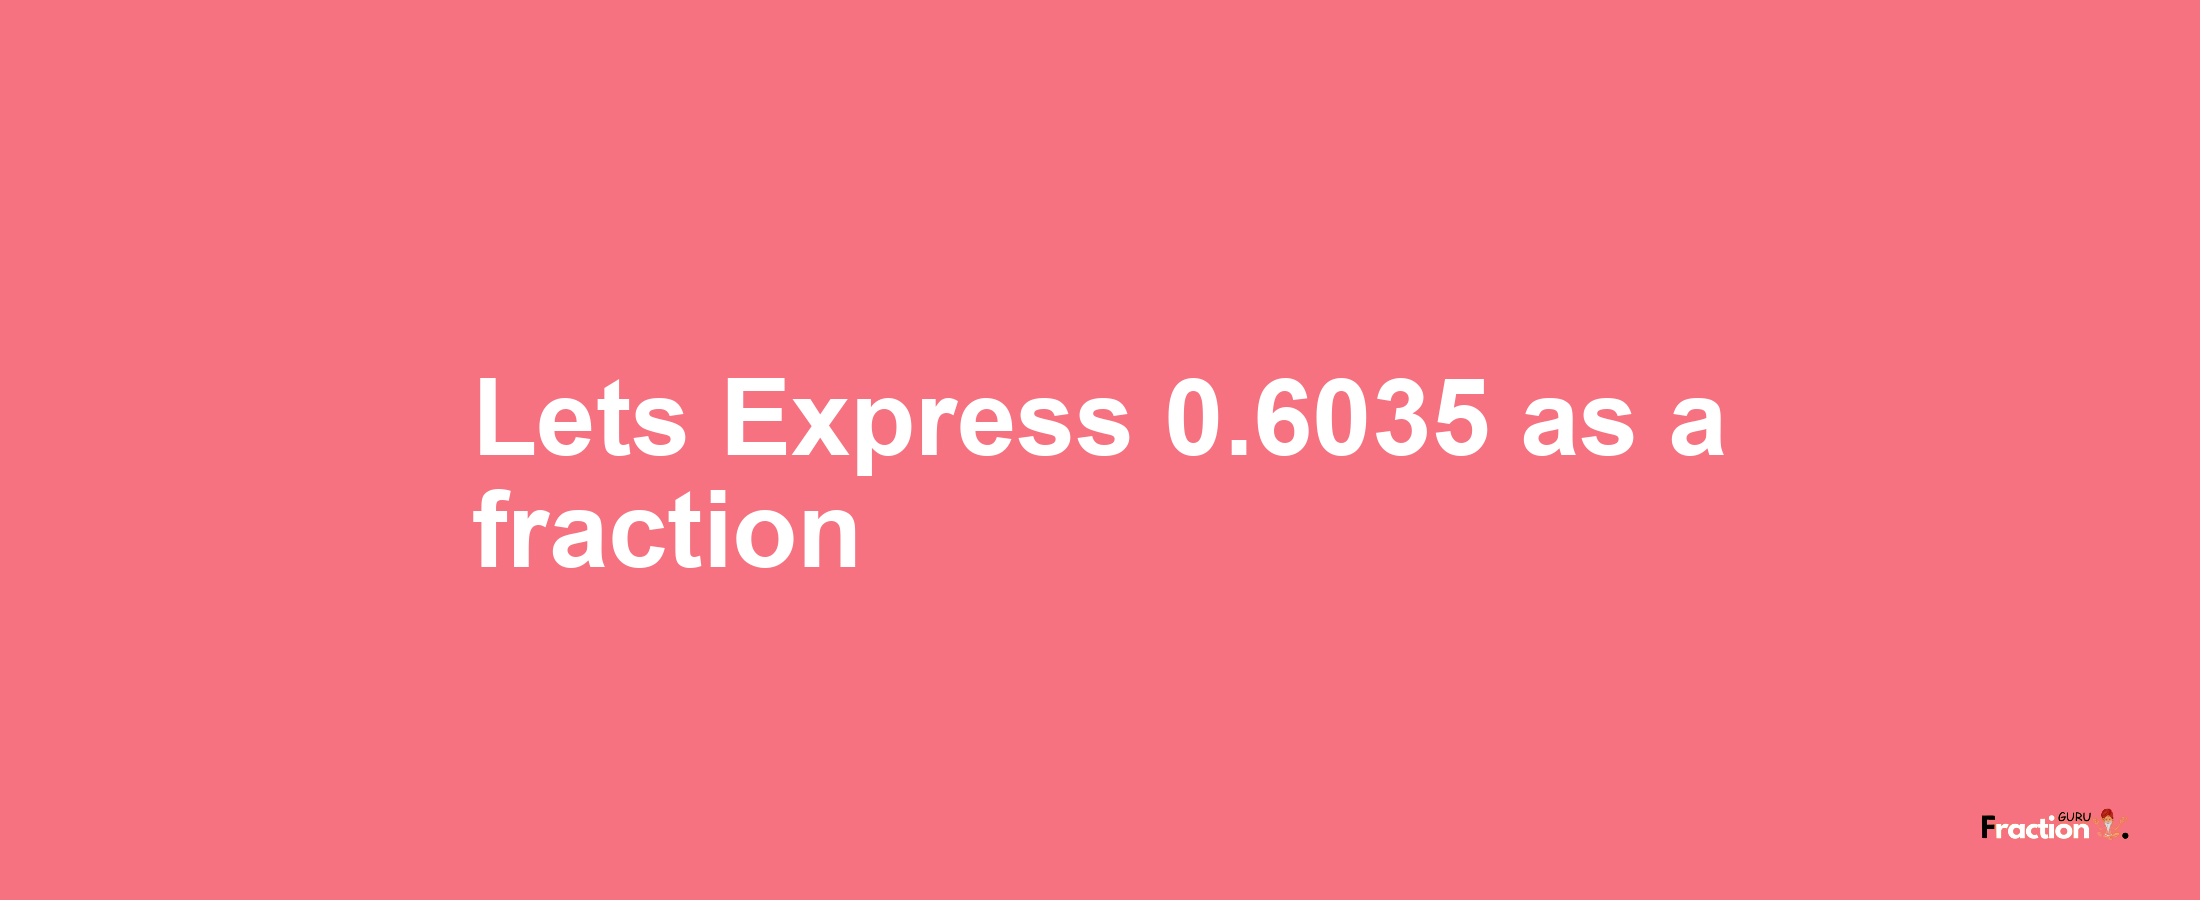 Lets Express 0.6035 as afraction